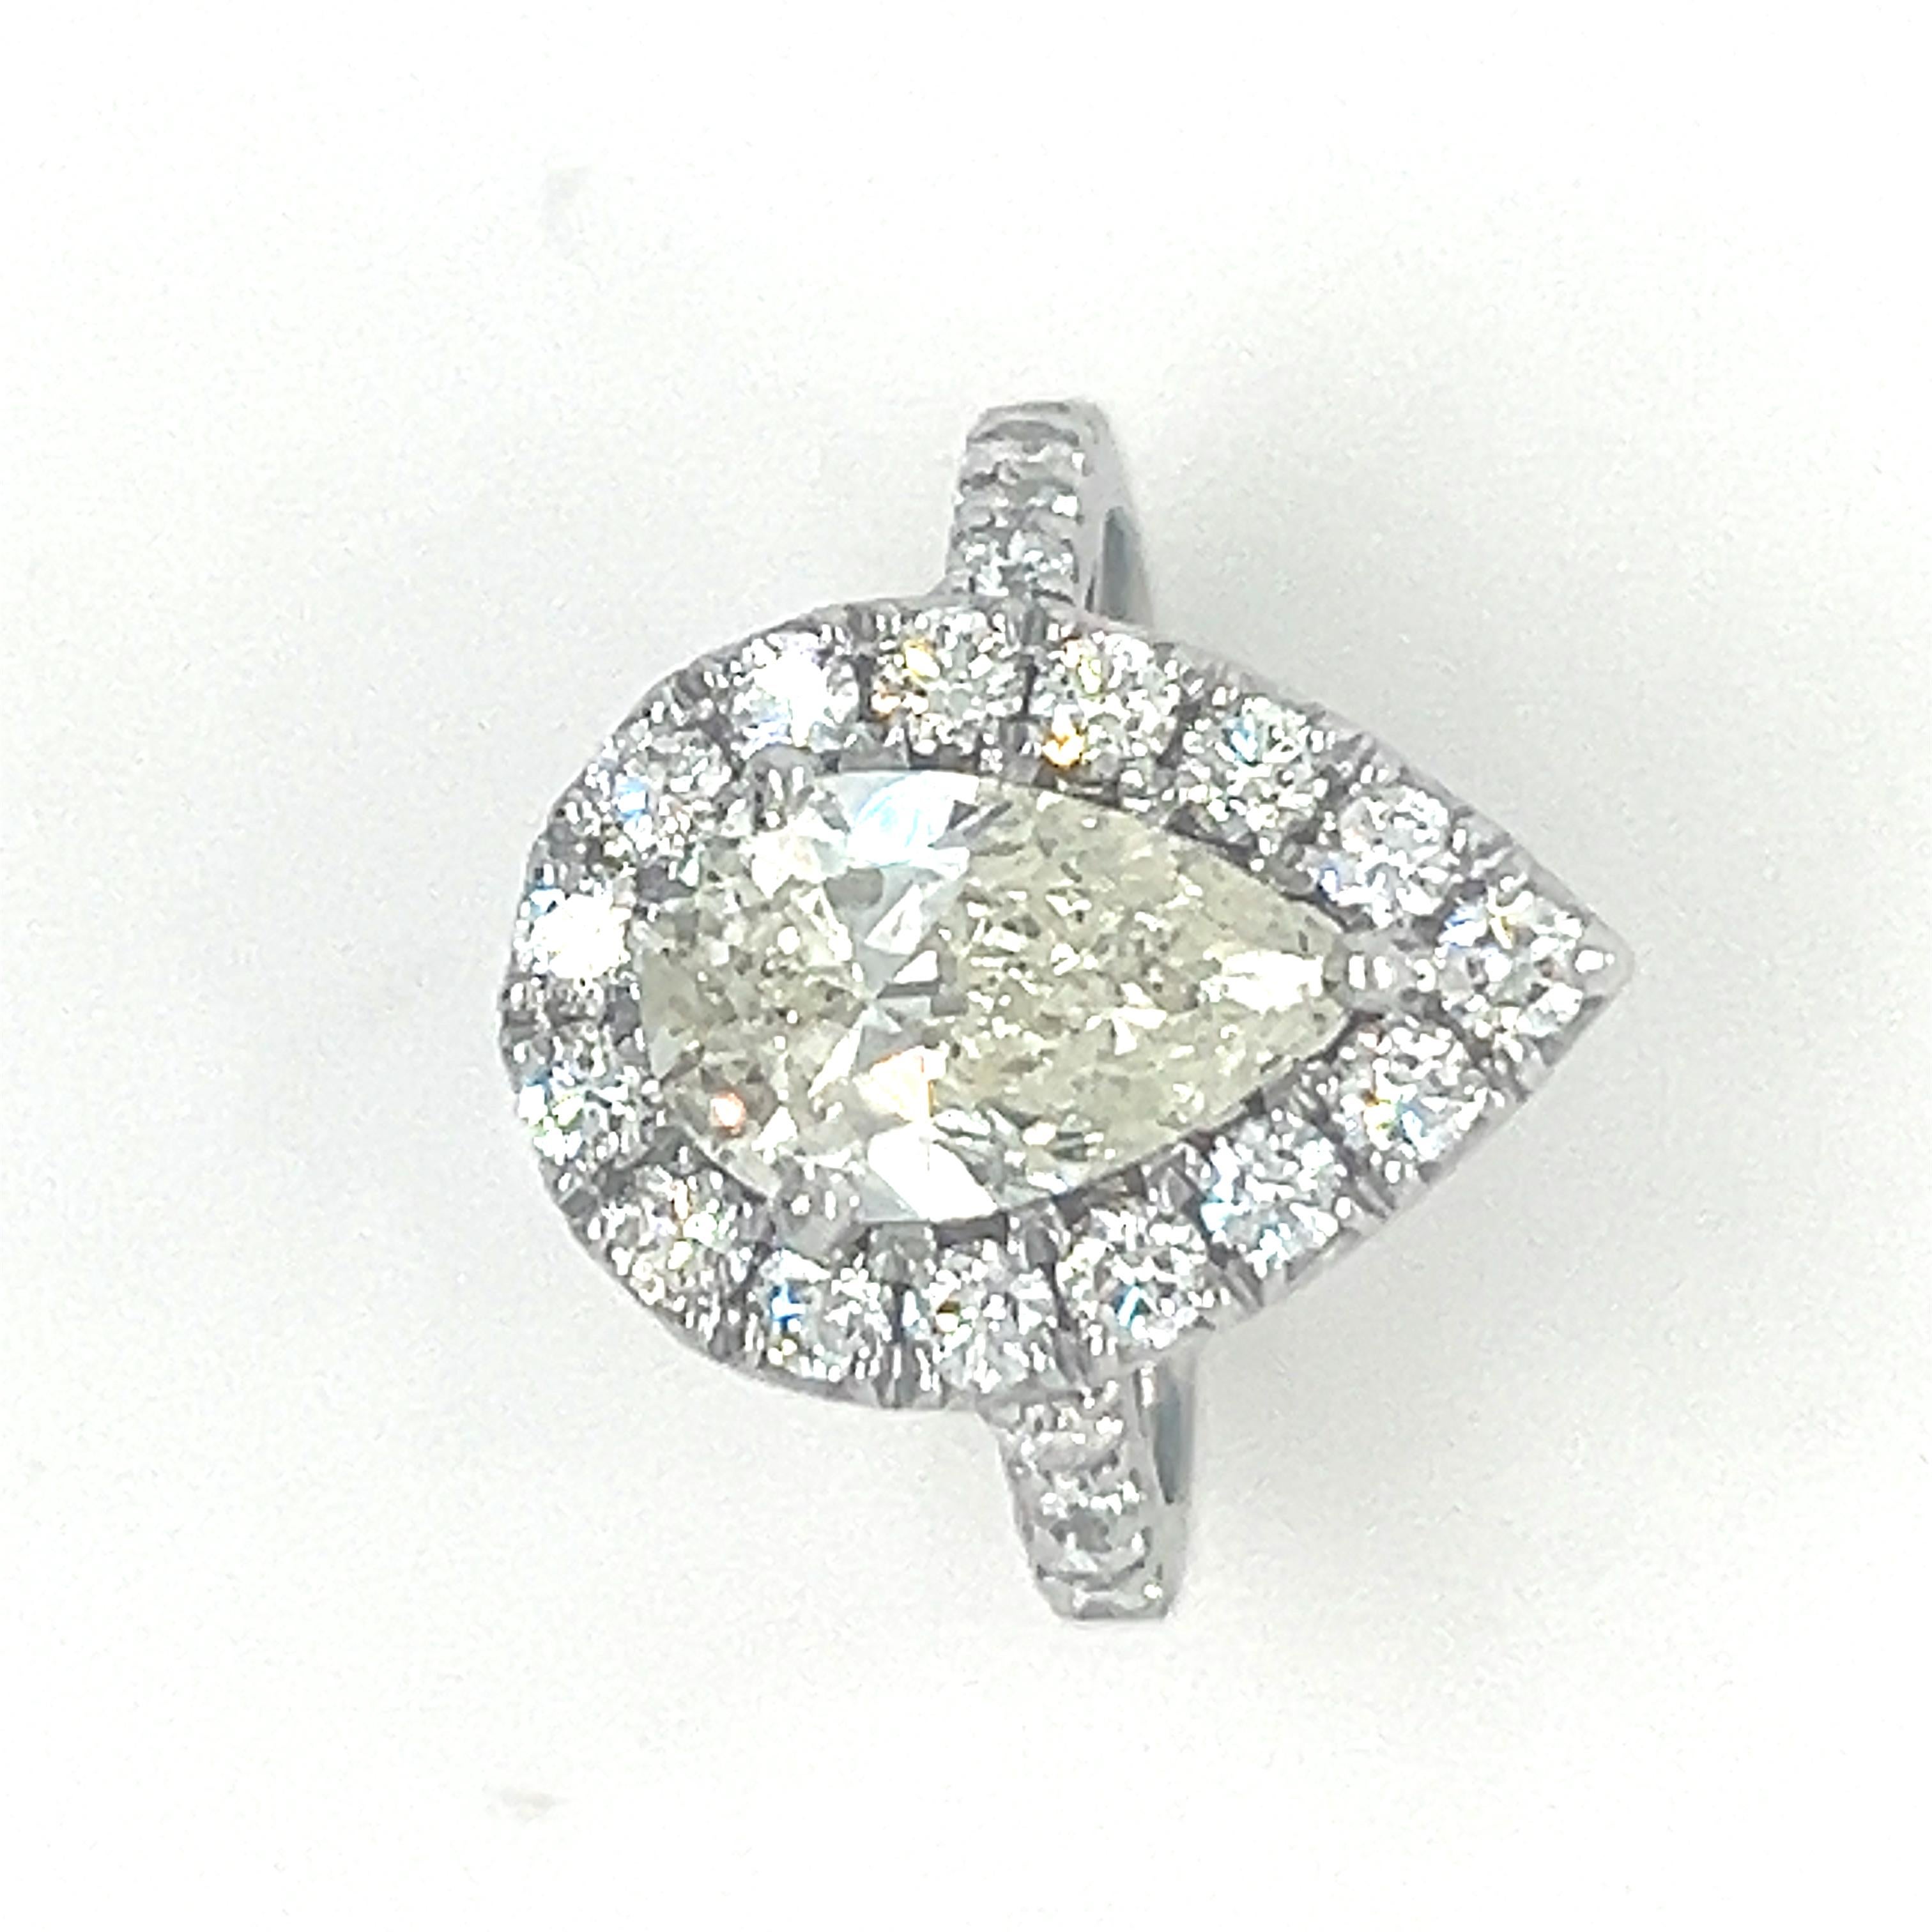 A Pear Shape Brilliant Cut Diamond Cluster Ring, three claw set 18ct white gold within a border of 15 round brilliant cut diamonds and with 8 round brilliant cut diamonds claw set down the shoulders on a 1.9mm band.

Diamonds 1 = 2.01ct (estimated),